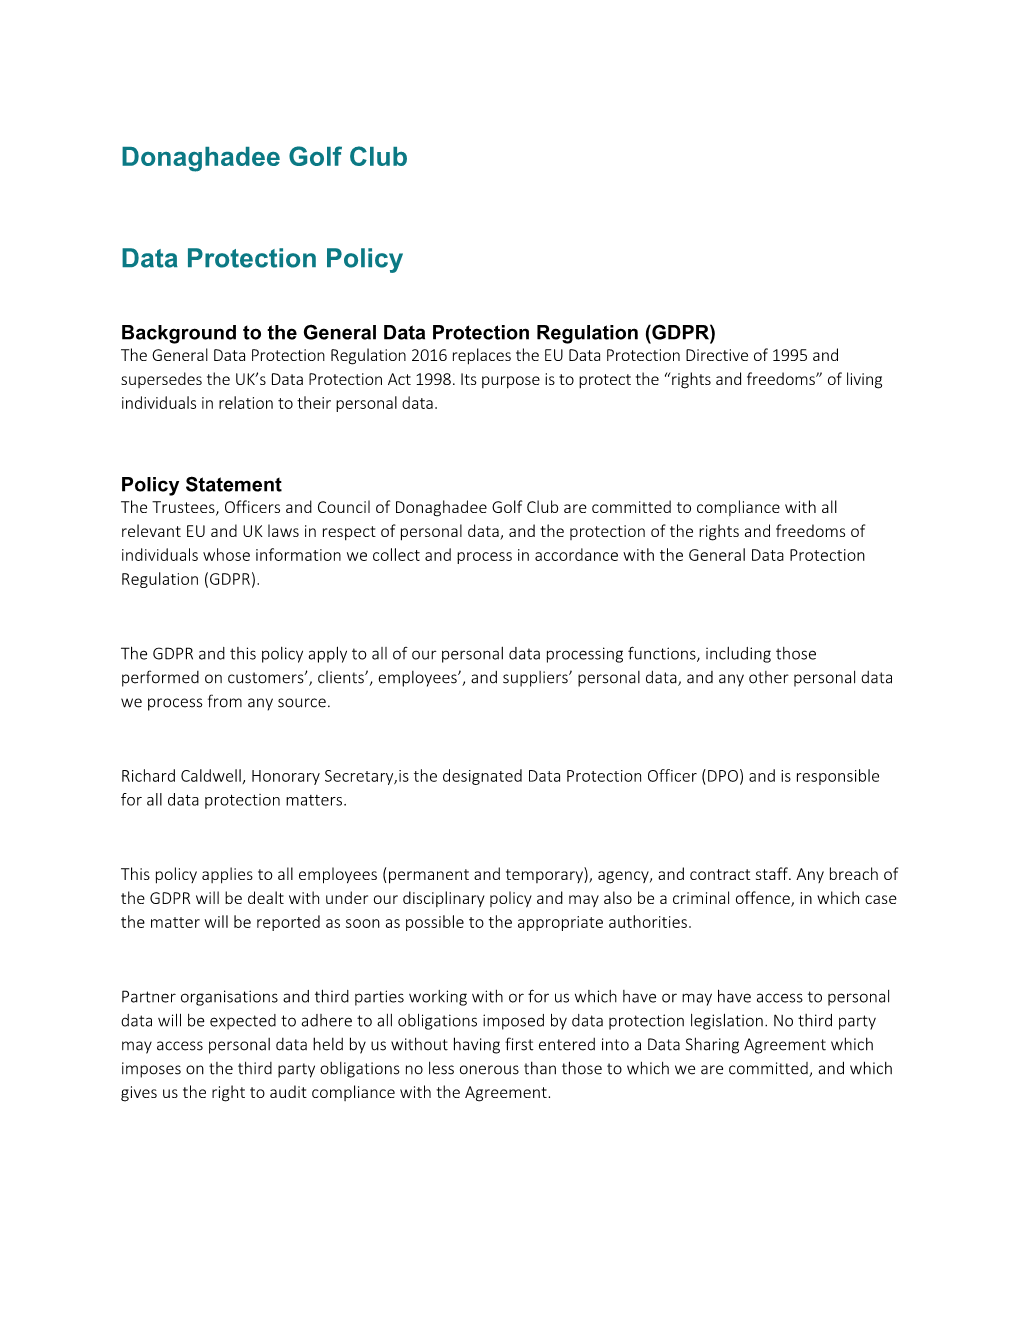 Background to the General Data Protection Regulation (GDPR)